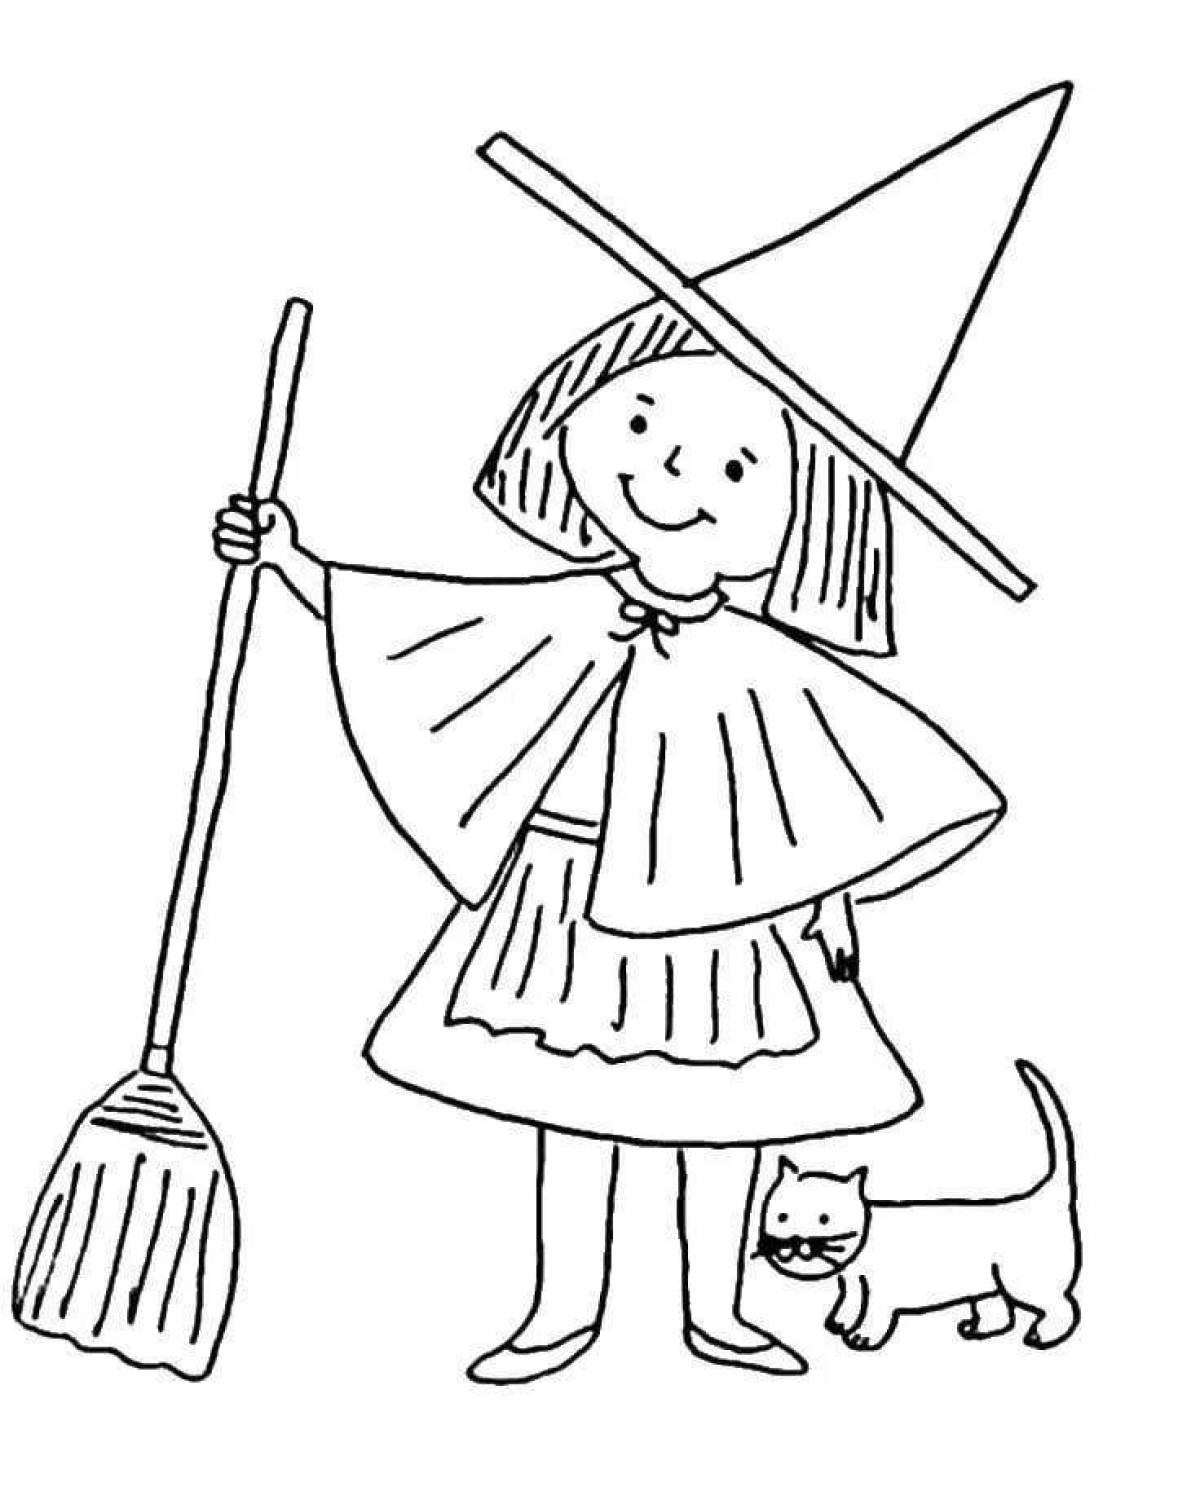 Coloring book joyful little witch